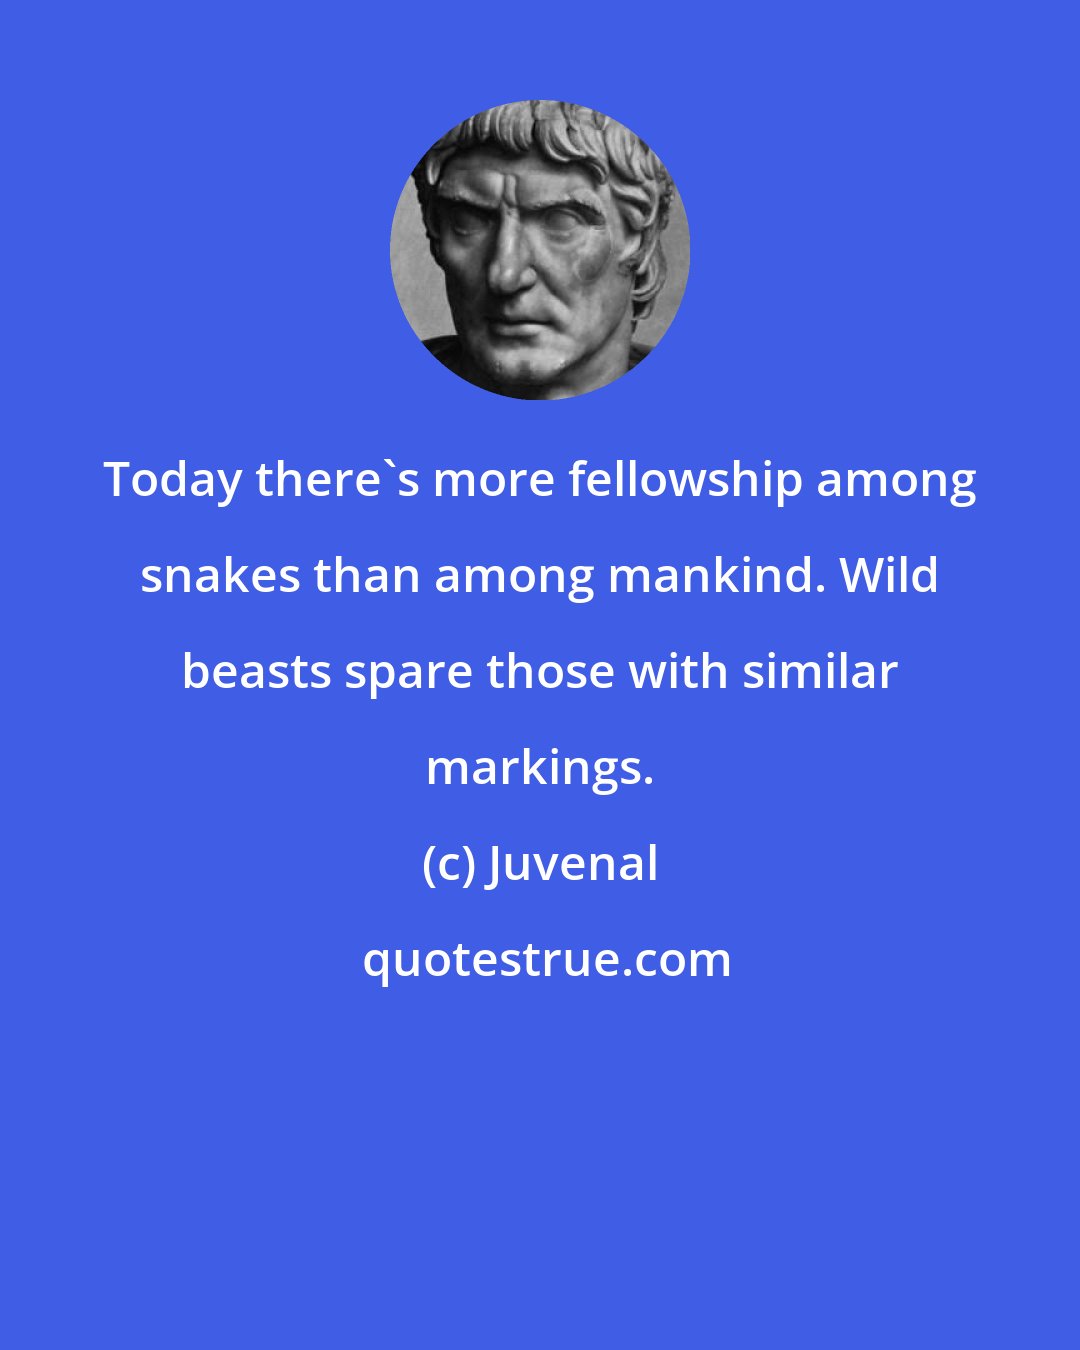 Juvenal: Today there's more fellowship among snakes than among mankind. Wild beasts spare those with similar markings.